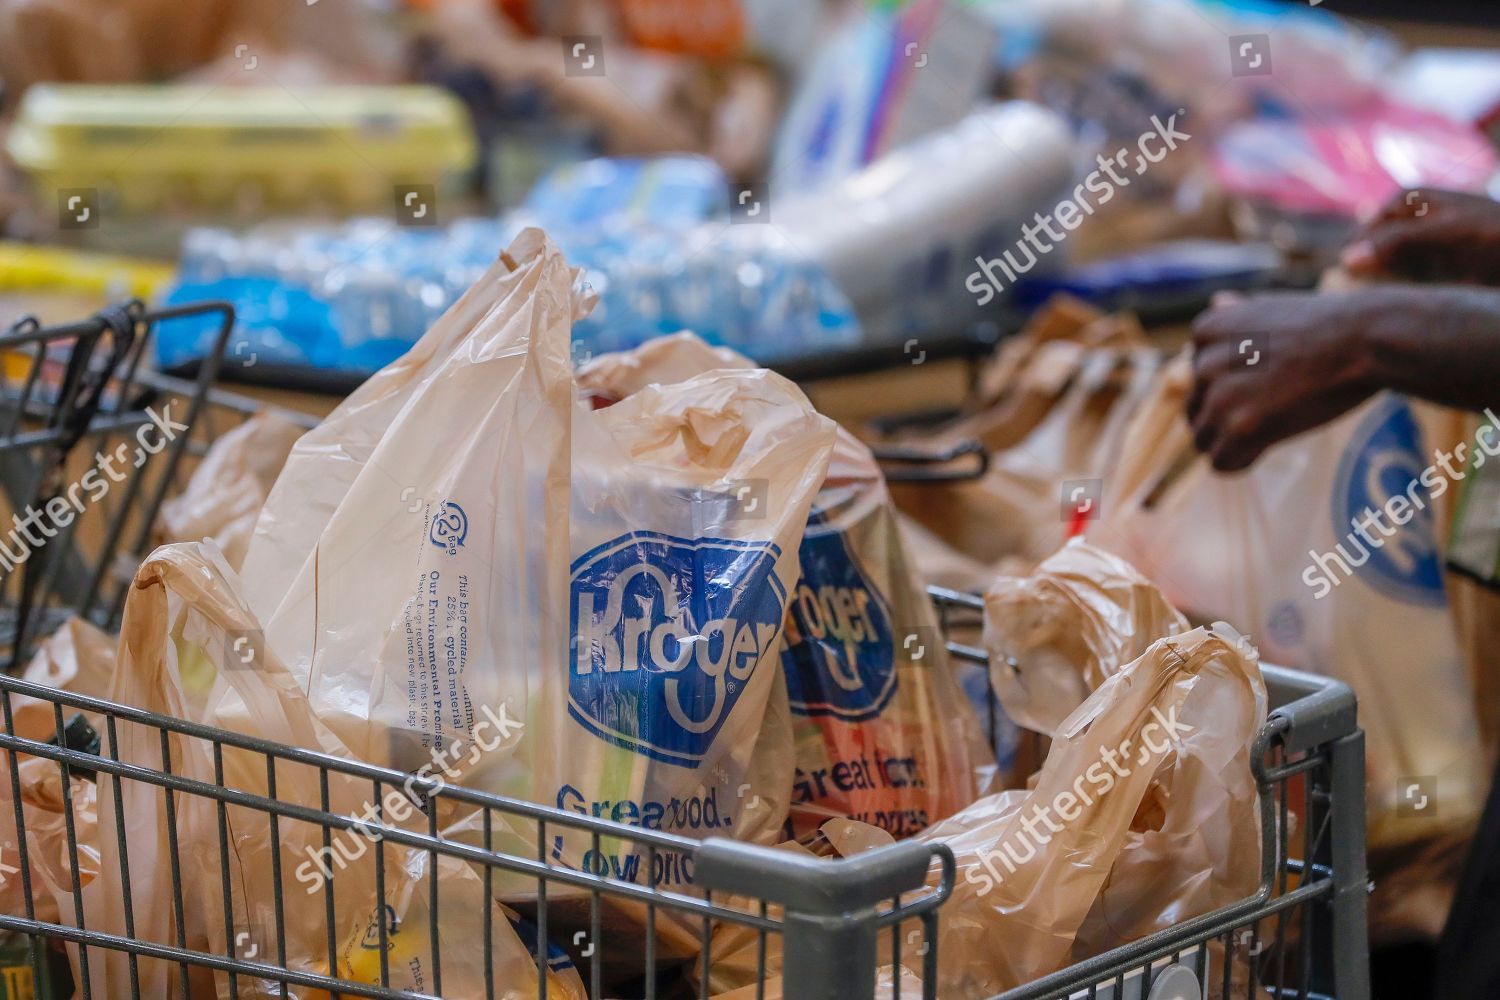 Kroger to Phase out Single-Use Plastic Bags - Scioto Post